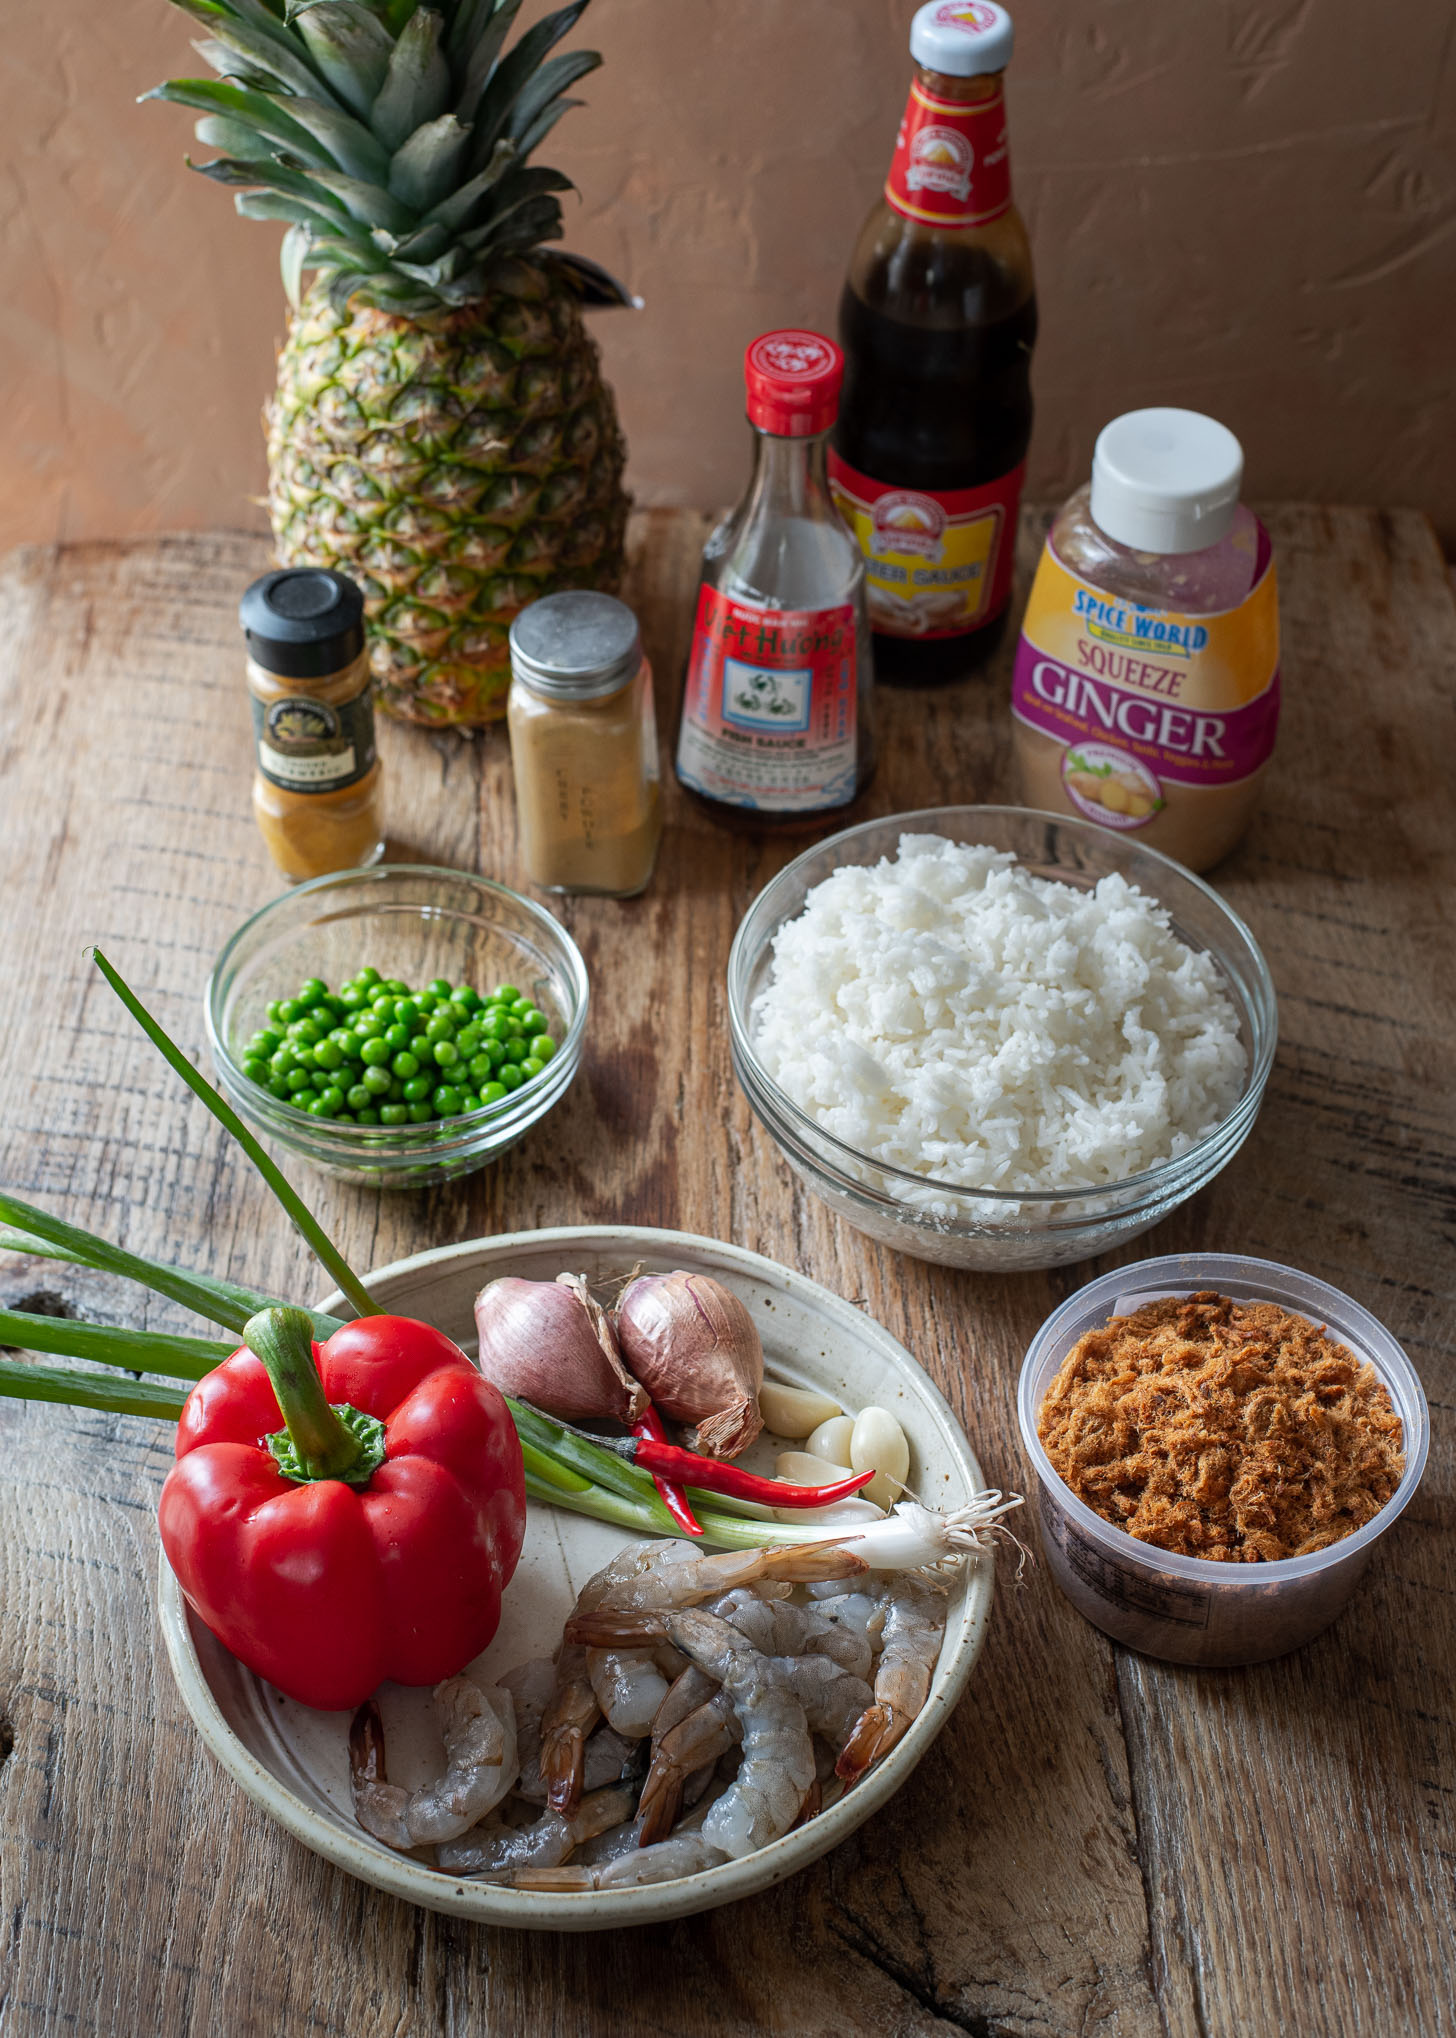 Ingredients for making Thai pineapple fried rice.